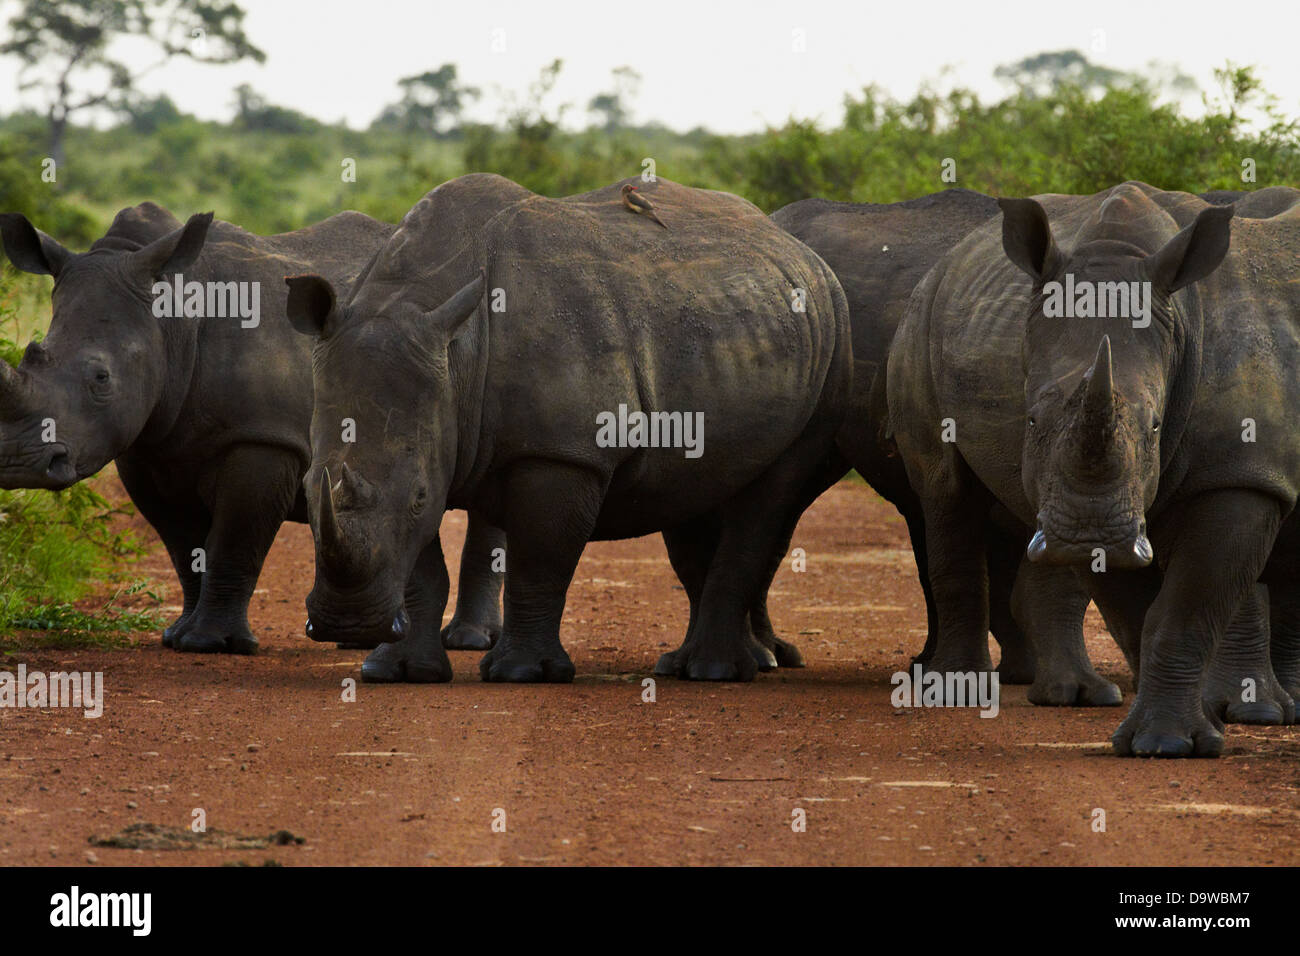 A herd (also called a 'crash' or 'stubbornness') of southern white rhinoceroses blocking the road, Kruger National Park, Africa Stock Photo